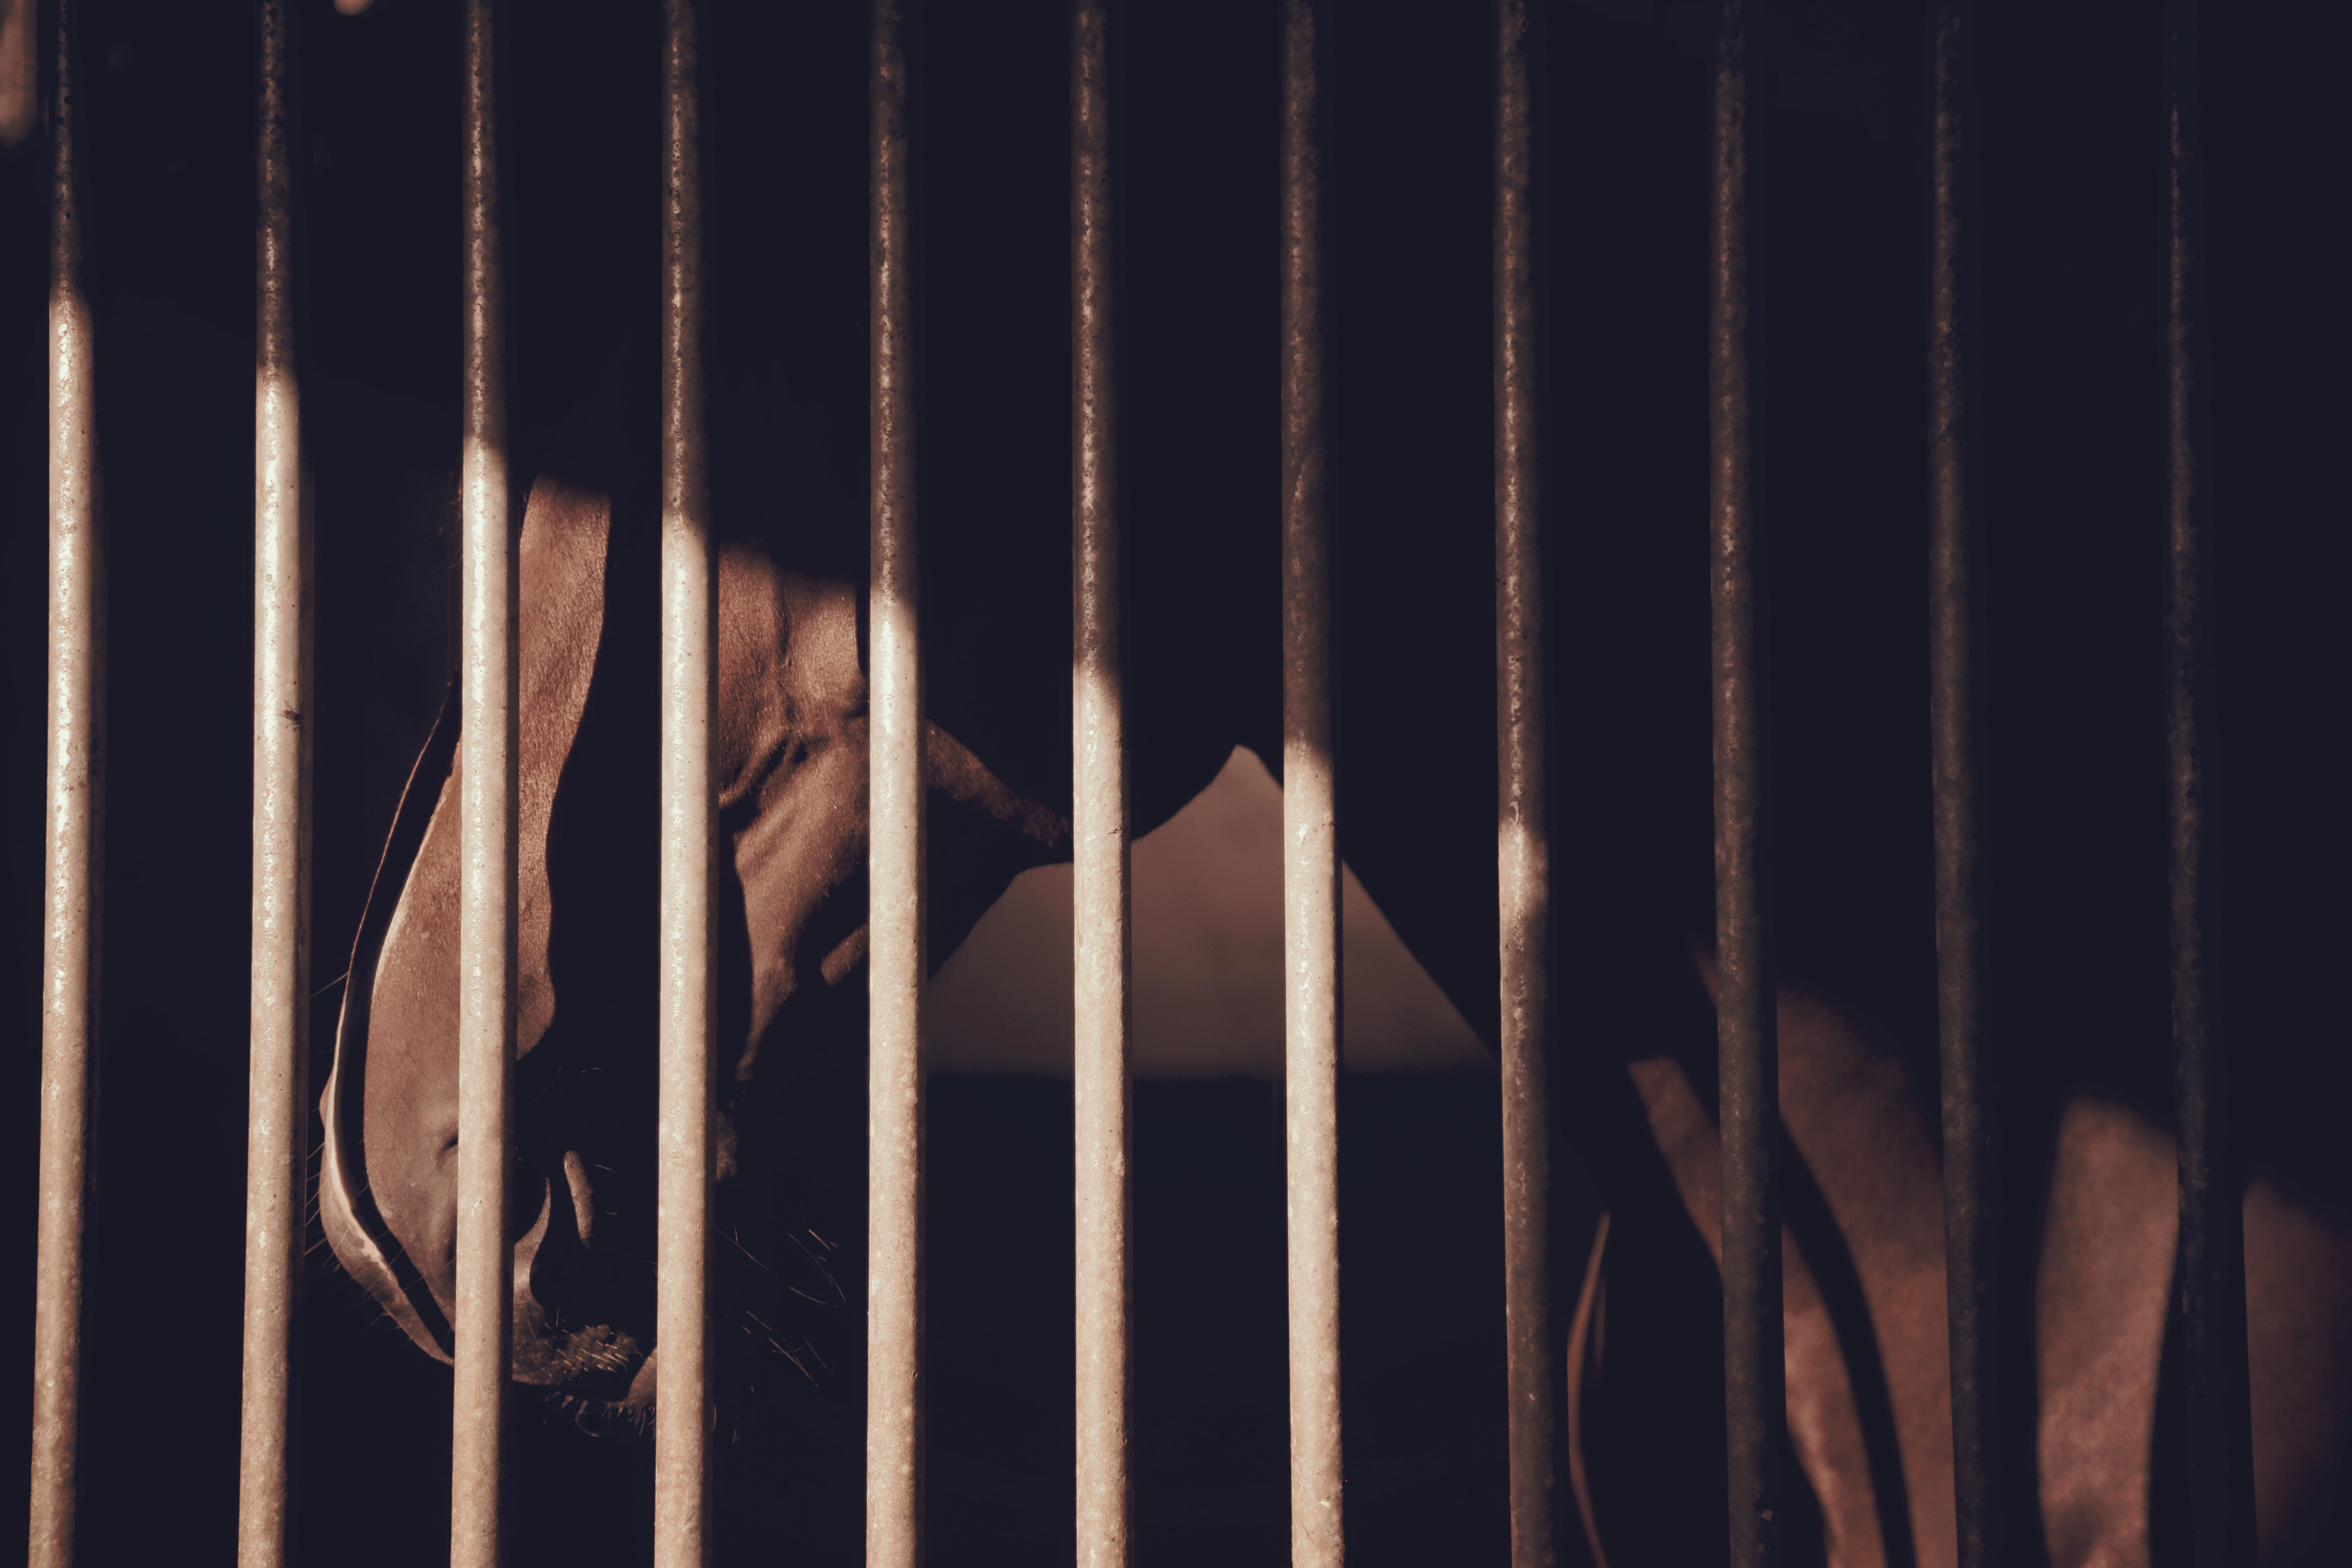 A horse in.a stall, viewed from behind the stall bars.